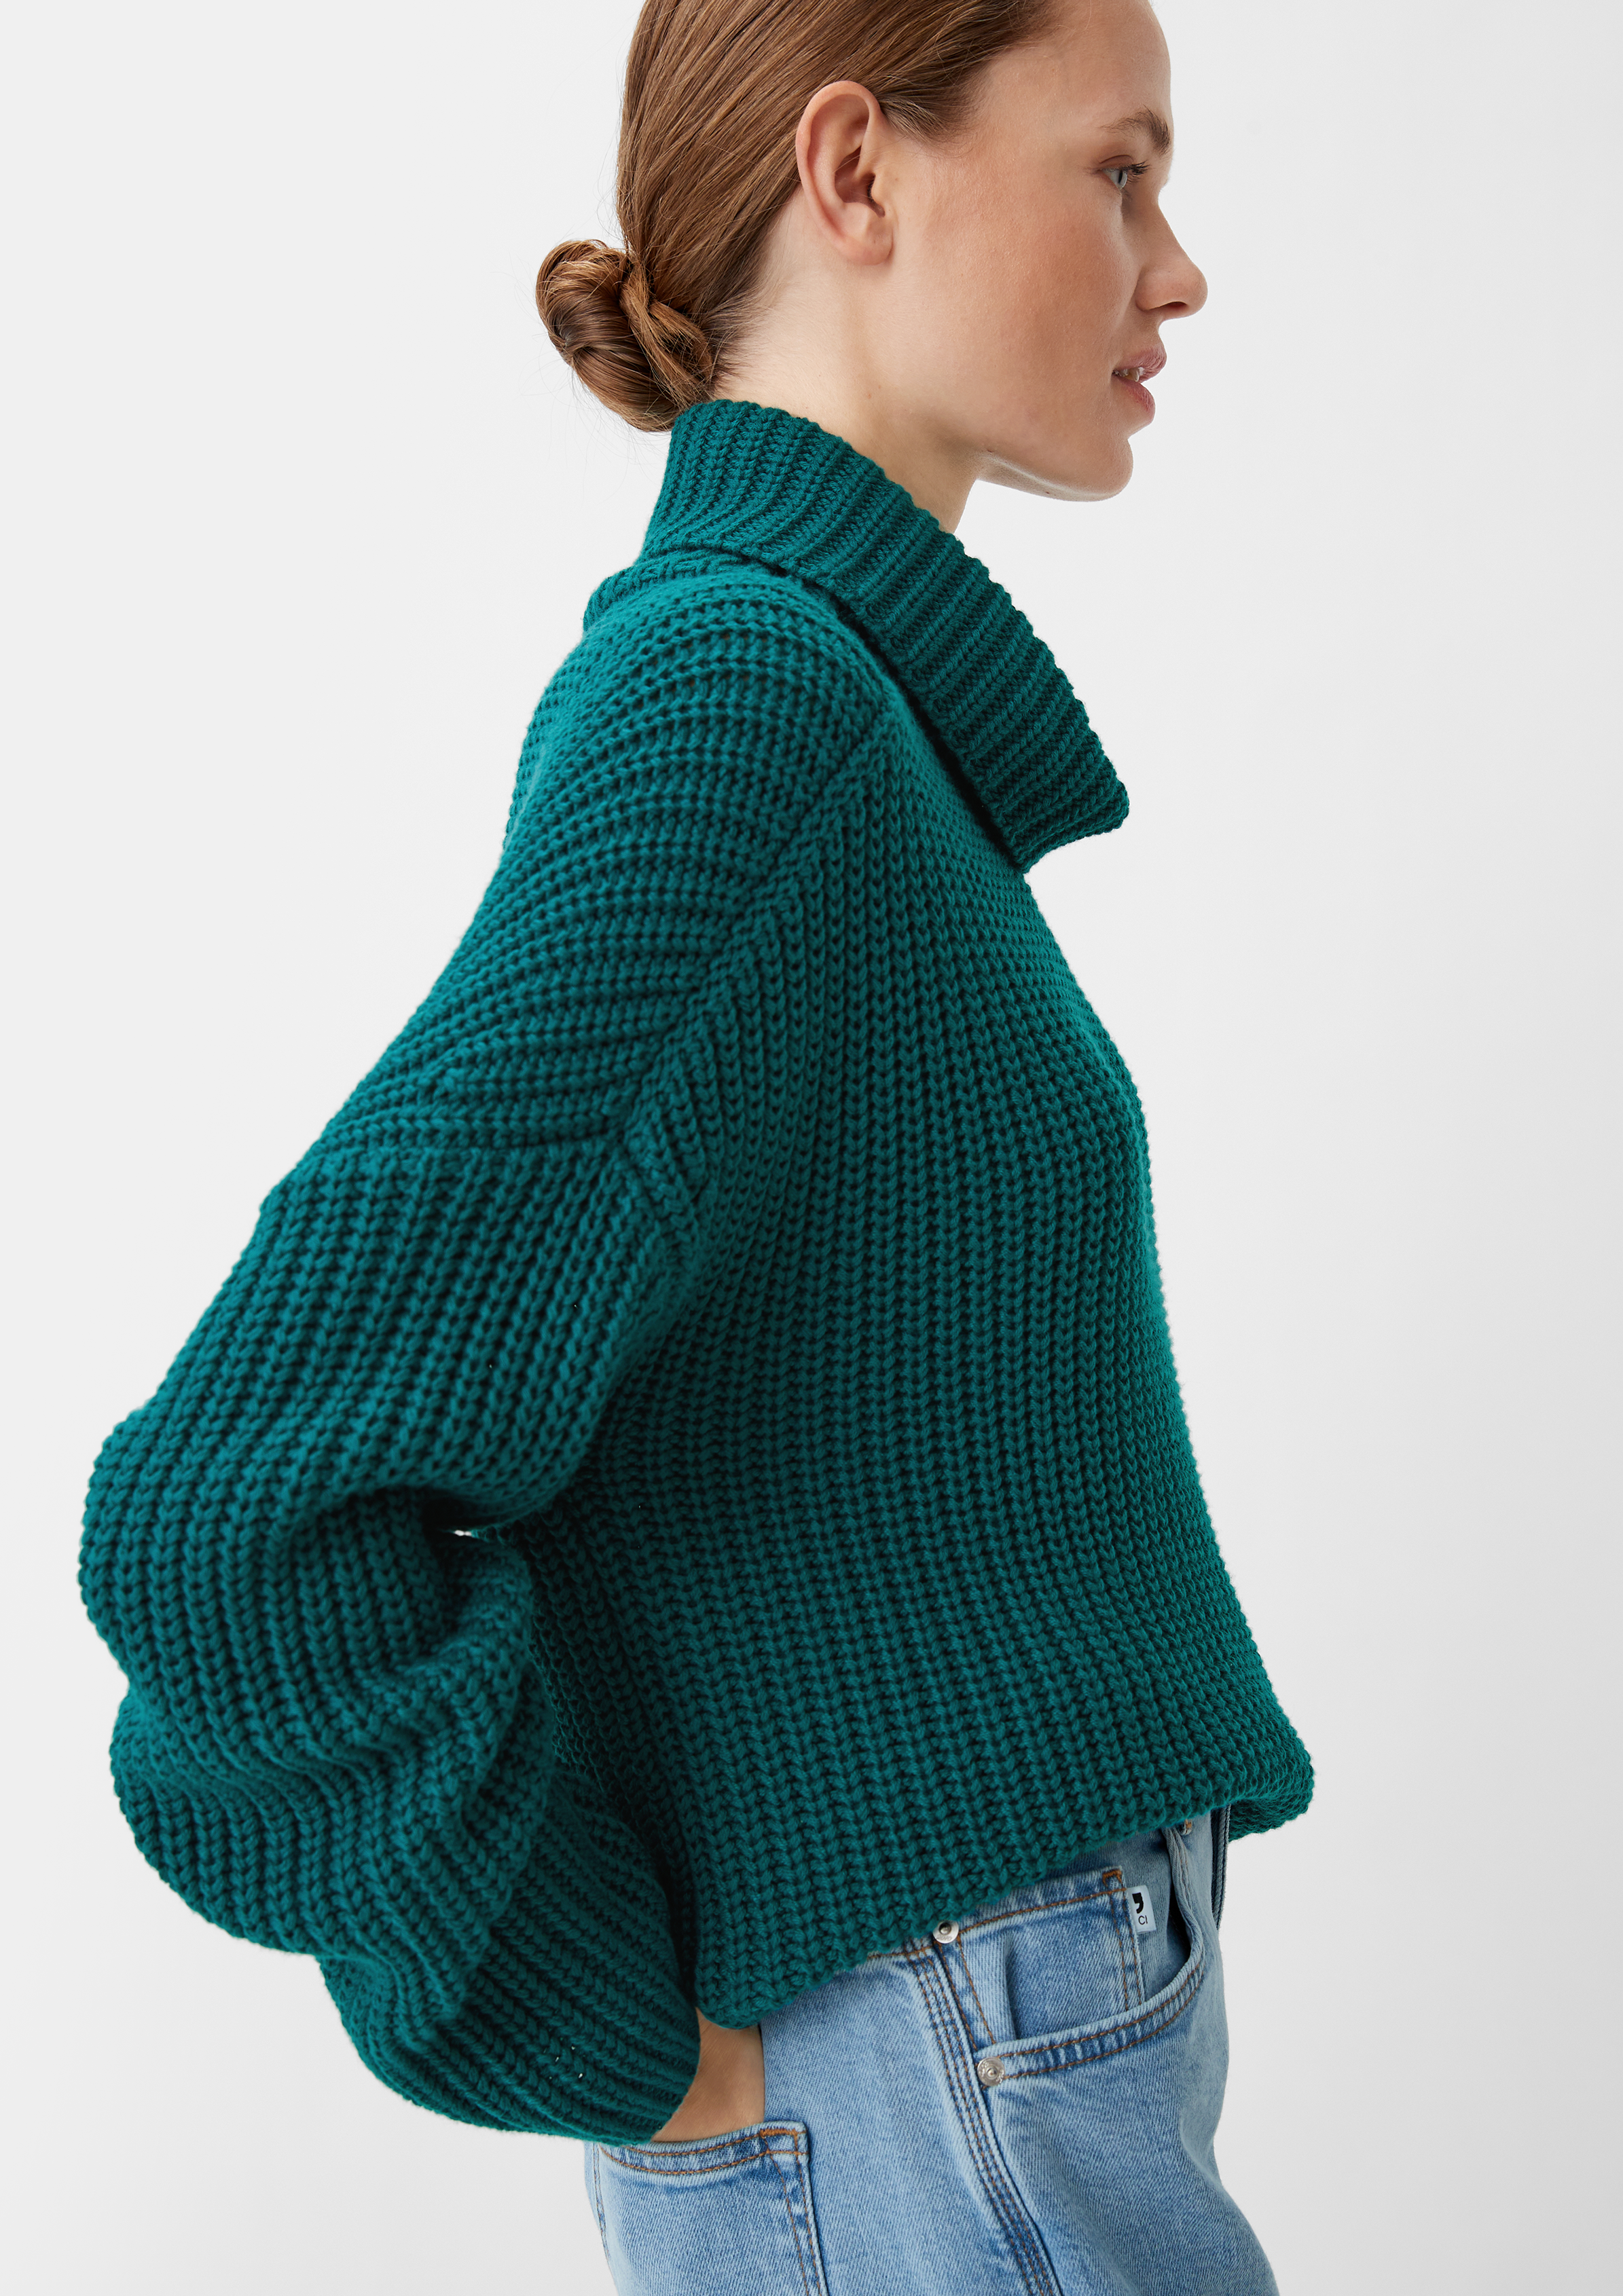 polo Loose-fitting with | petrol knitted neck - a Comma jumper